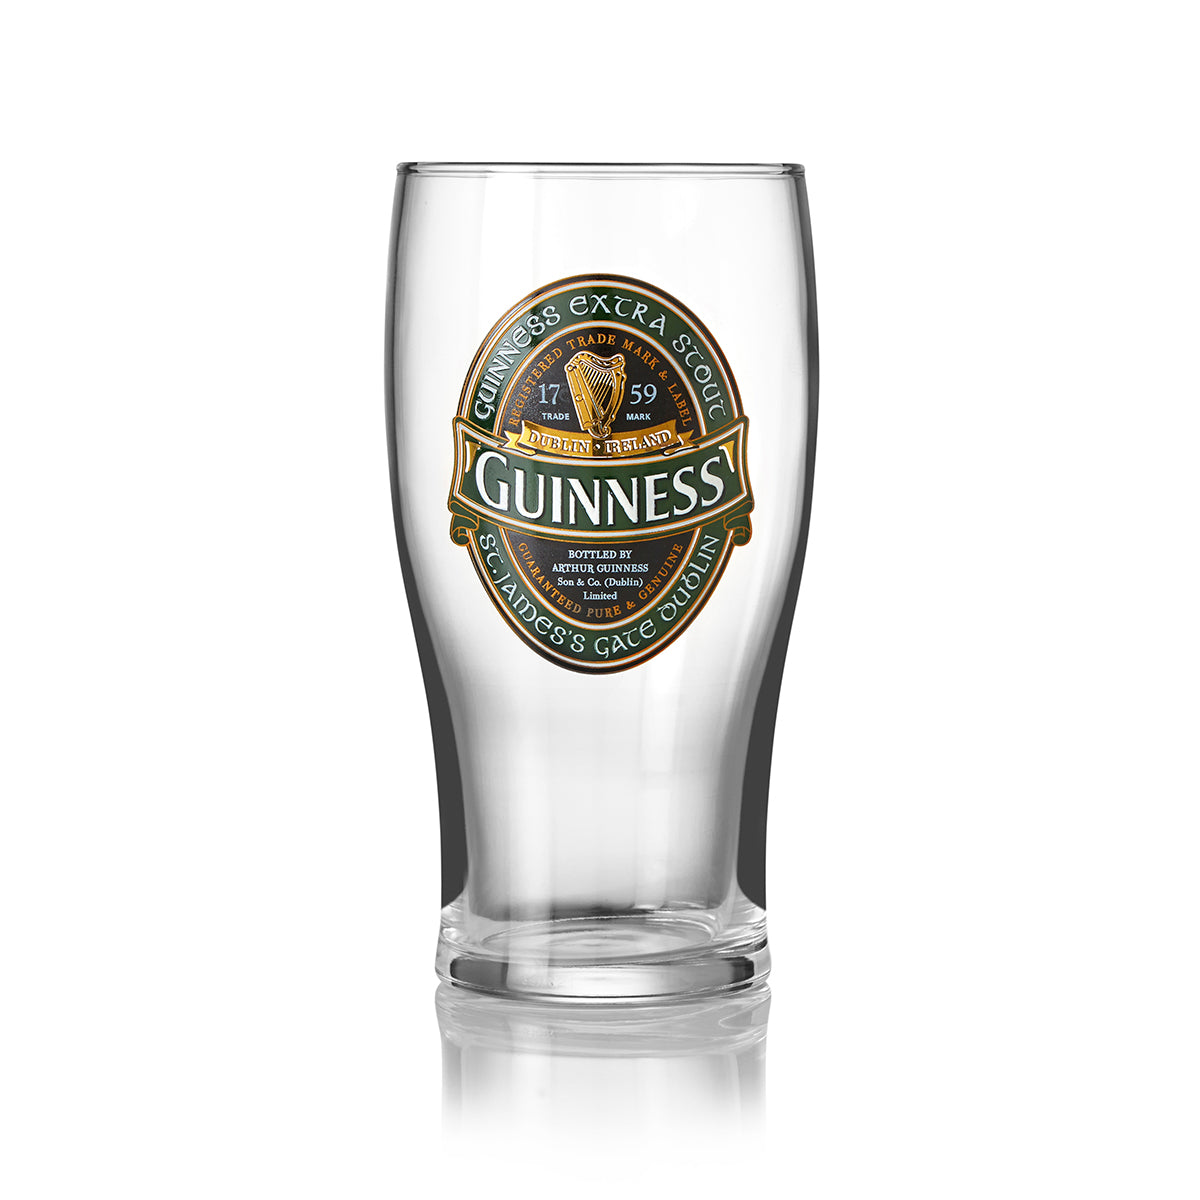 Guinness UK Ireland Collection Pint Glass - 4 Pack.